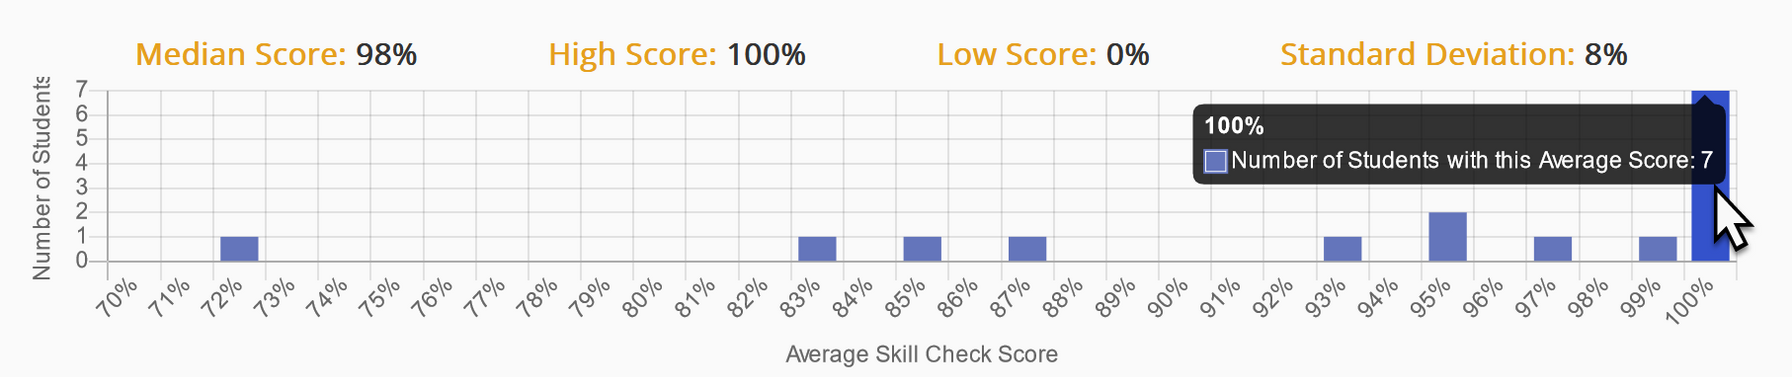 skillcheck-expanded-barchart.png